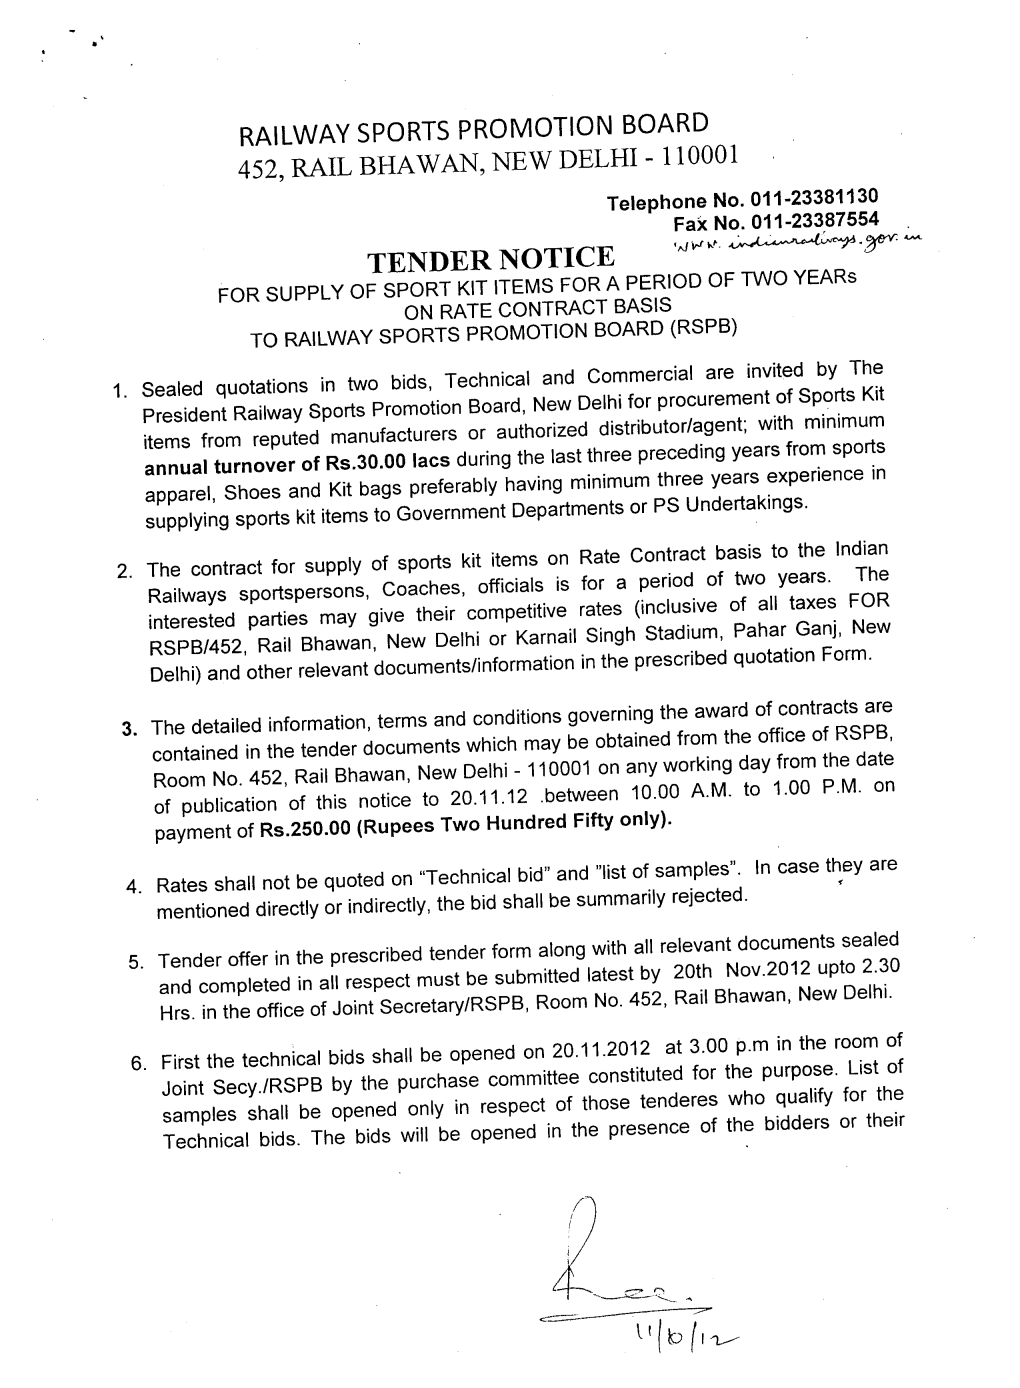 TENDER NOTICE 'N.1 T^R W• for SUPPLY of SPORT KIT ITEMS for a PERIOD of TWO Years on RATE CONTRACT BASIS to RAILWAY SPORTS PROMOTION BOARD (RSPB)